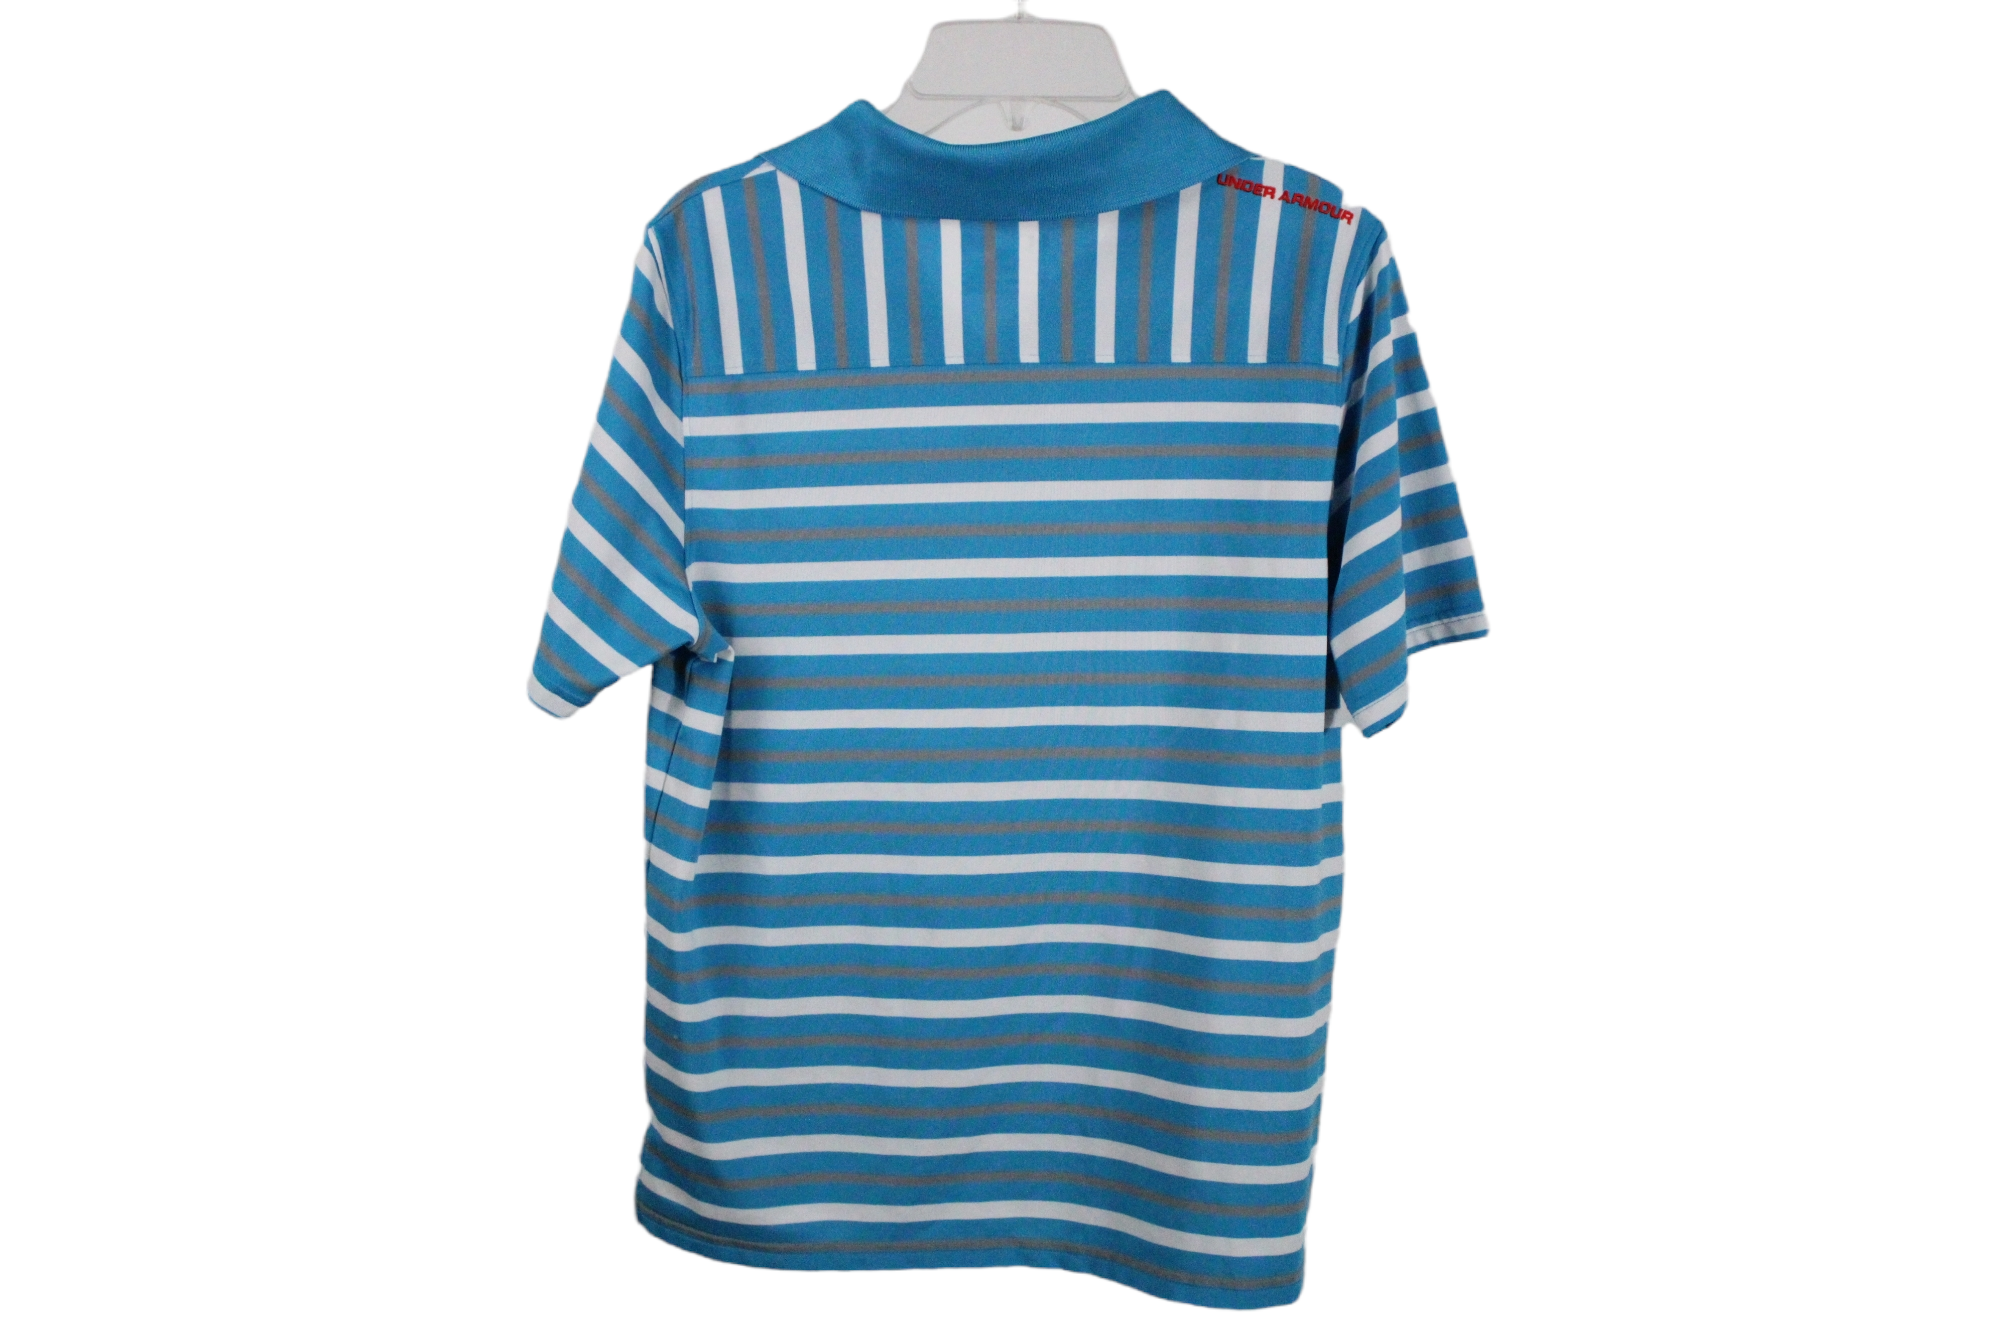 Under Armour Loose Fit HeatGear Blue Striped Shirt | Youth L (14/16)